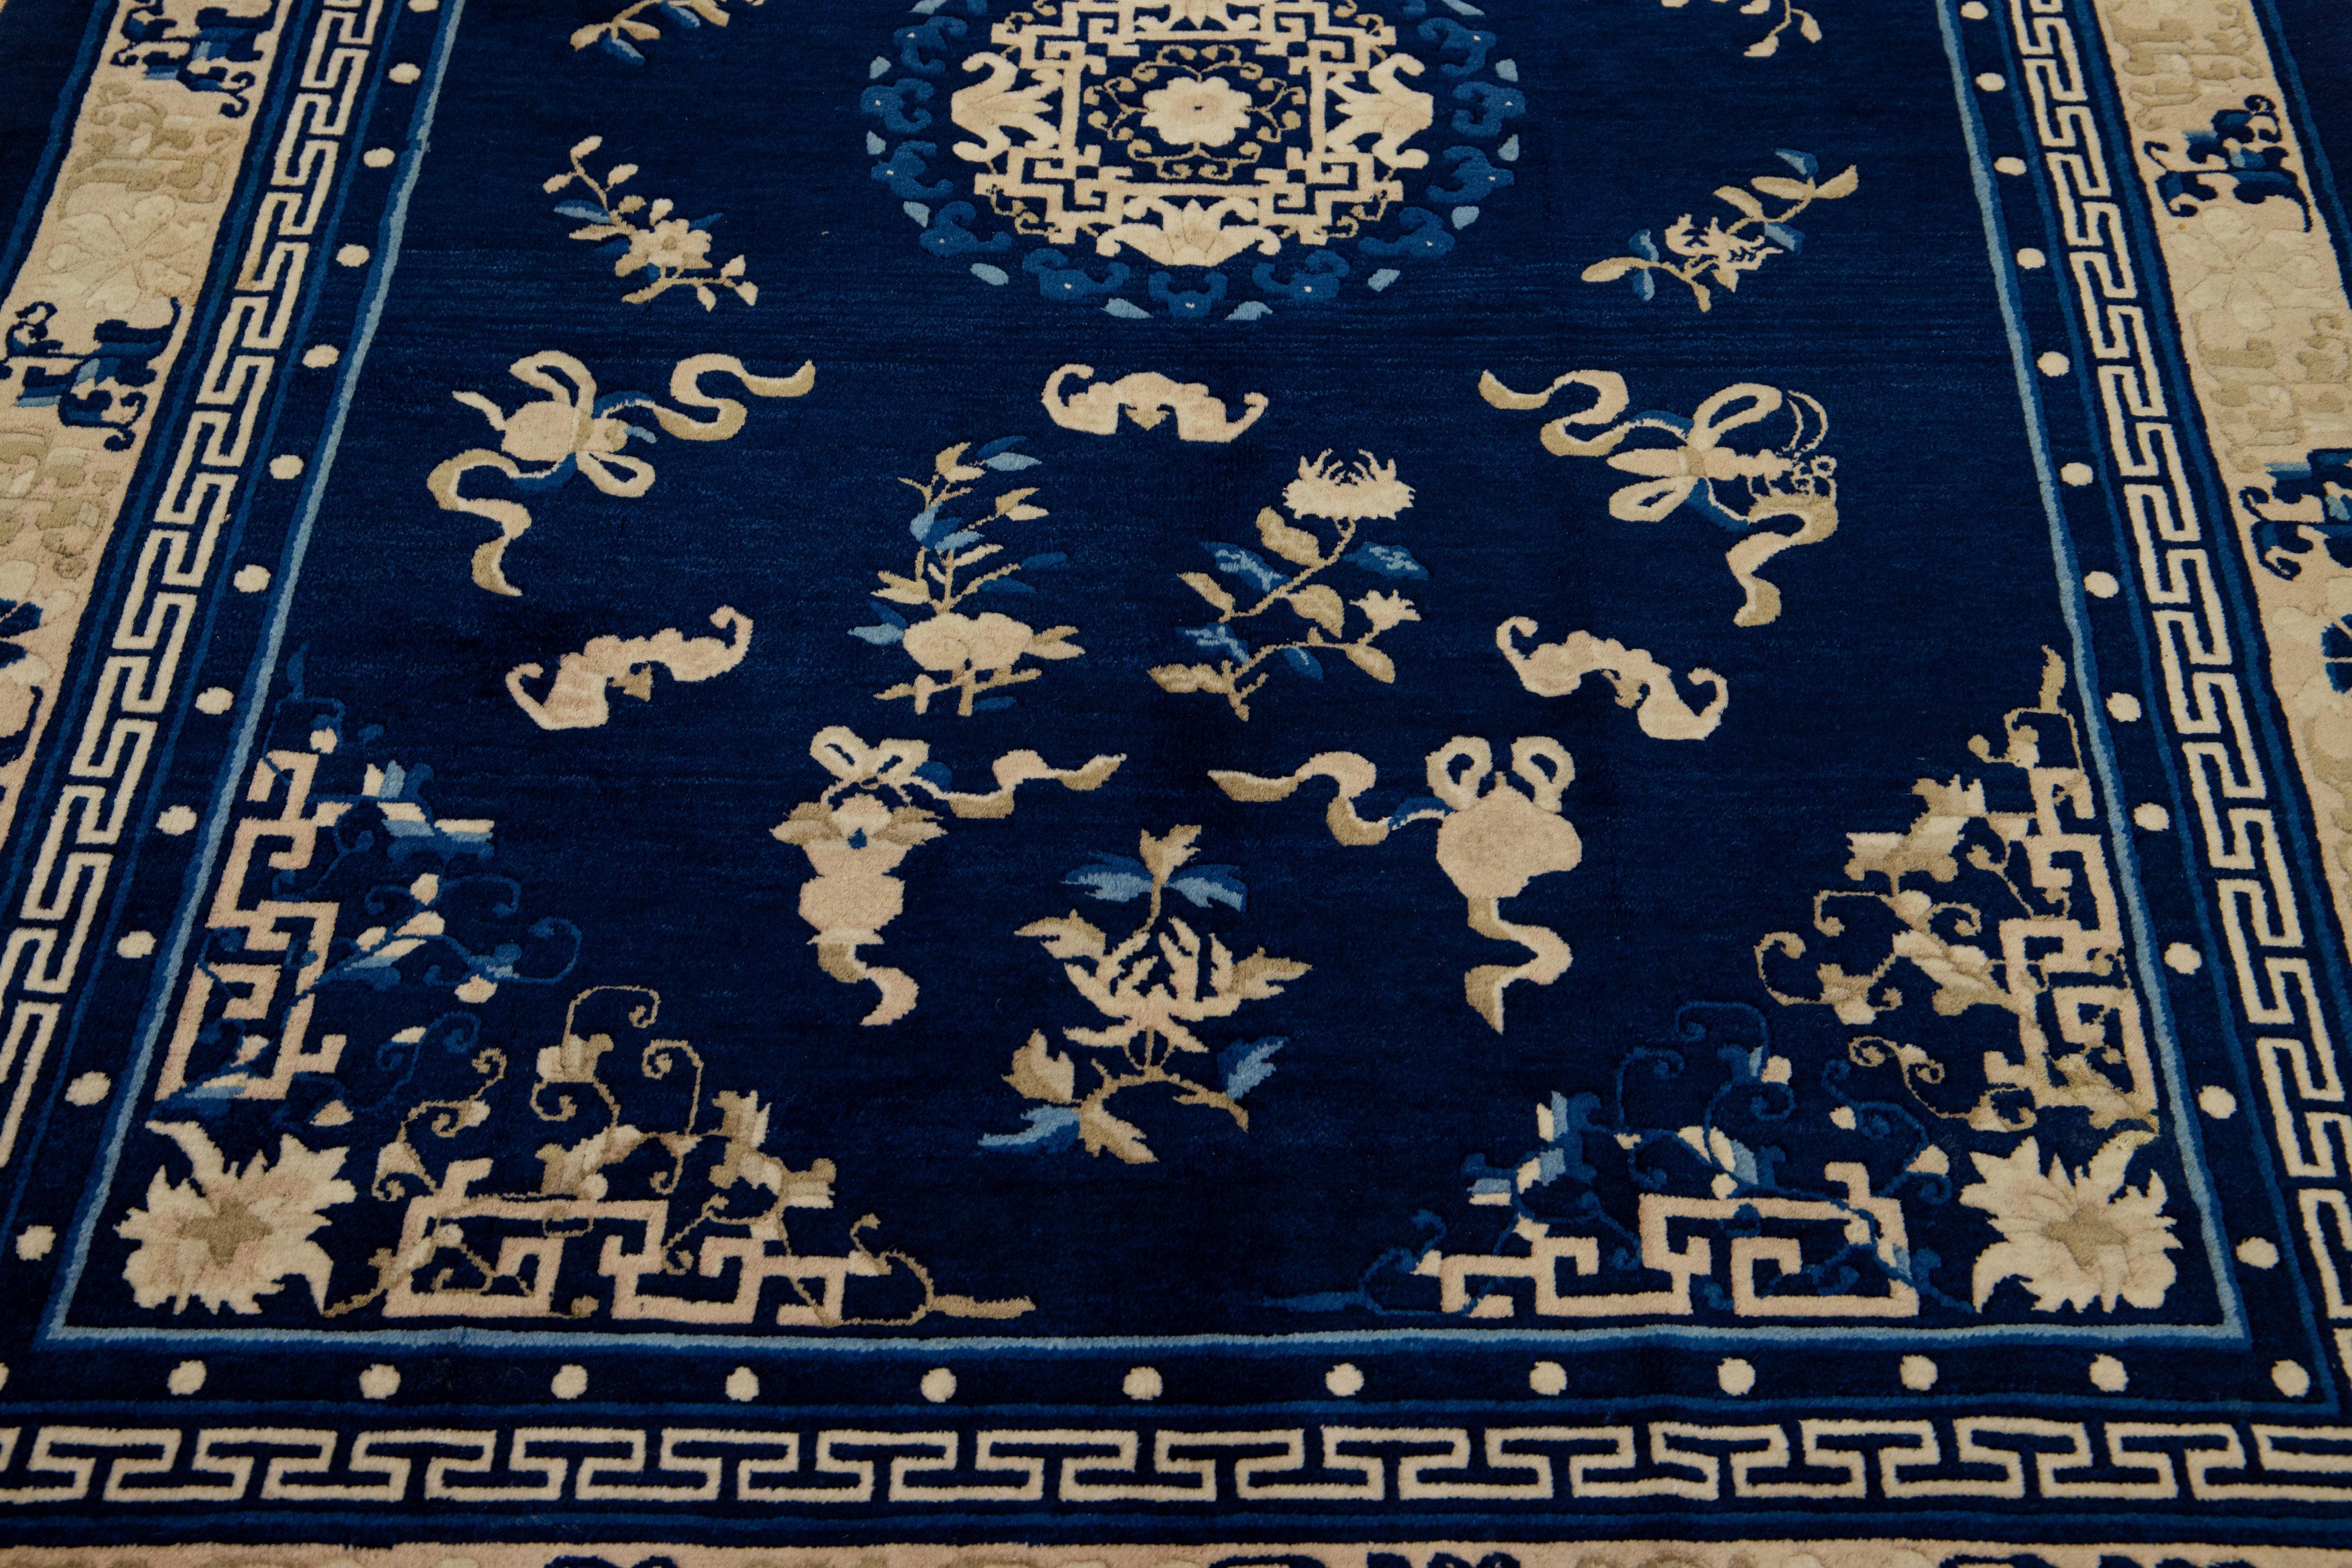 20th Century 1920s Antique Chinese Peking Wool Rug Handmade Blue with Classic Floral Design For Sale